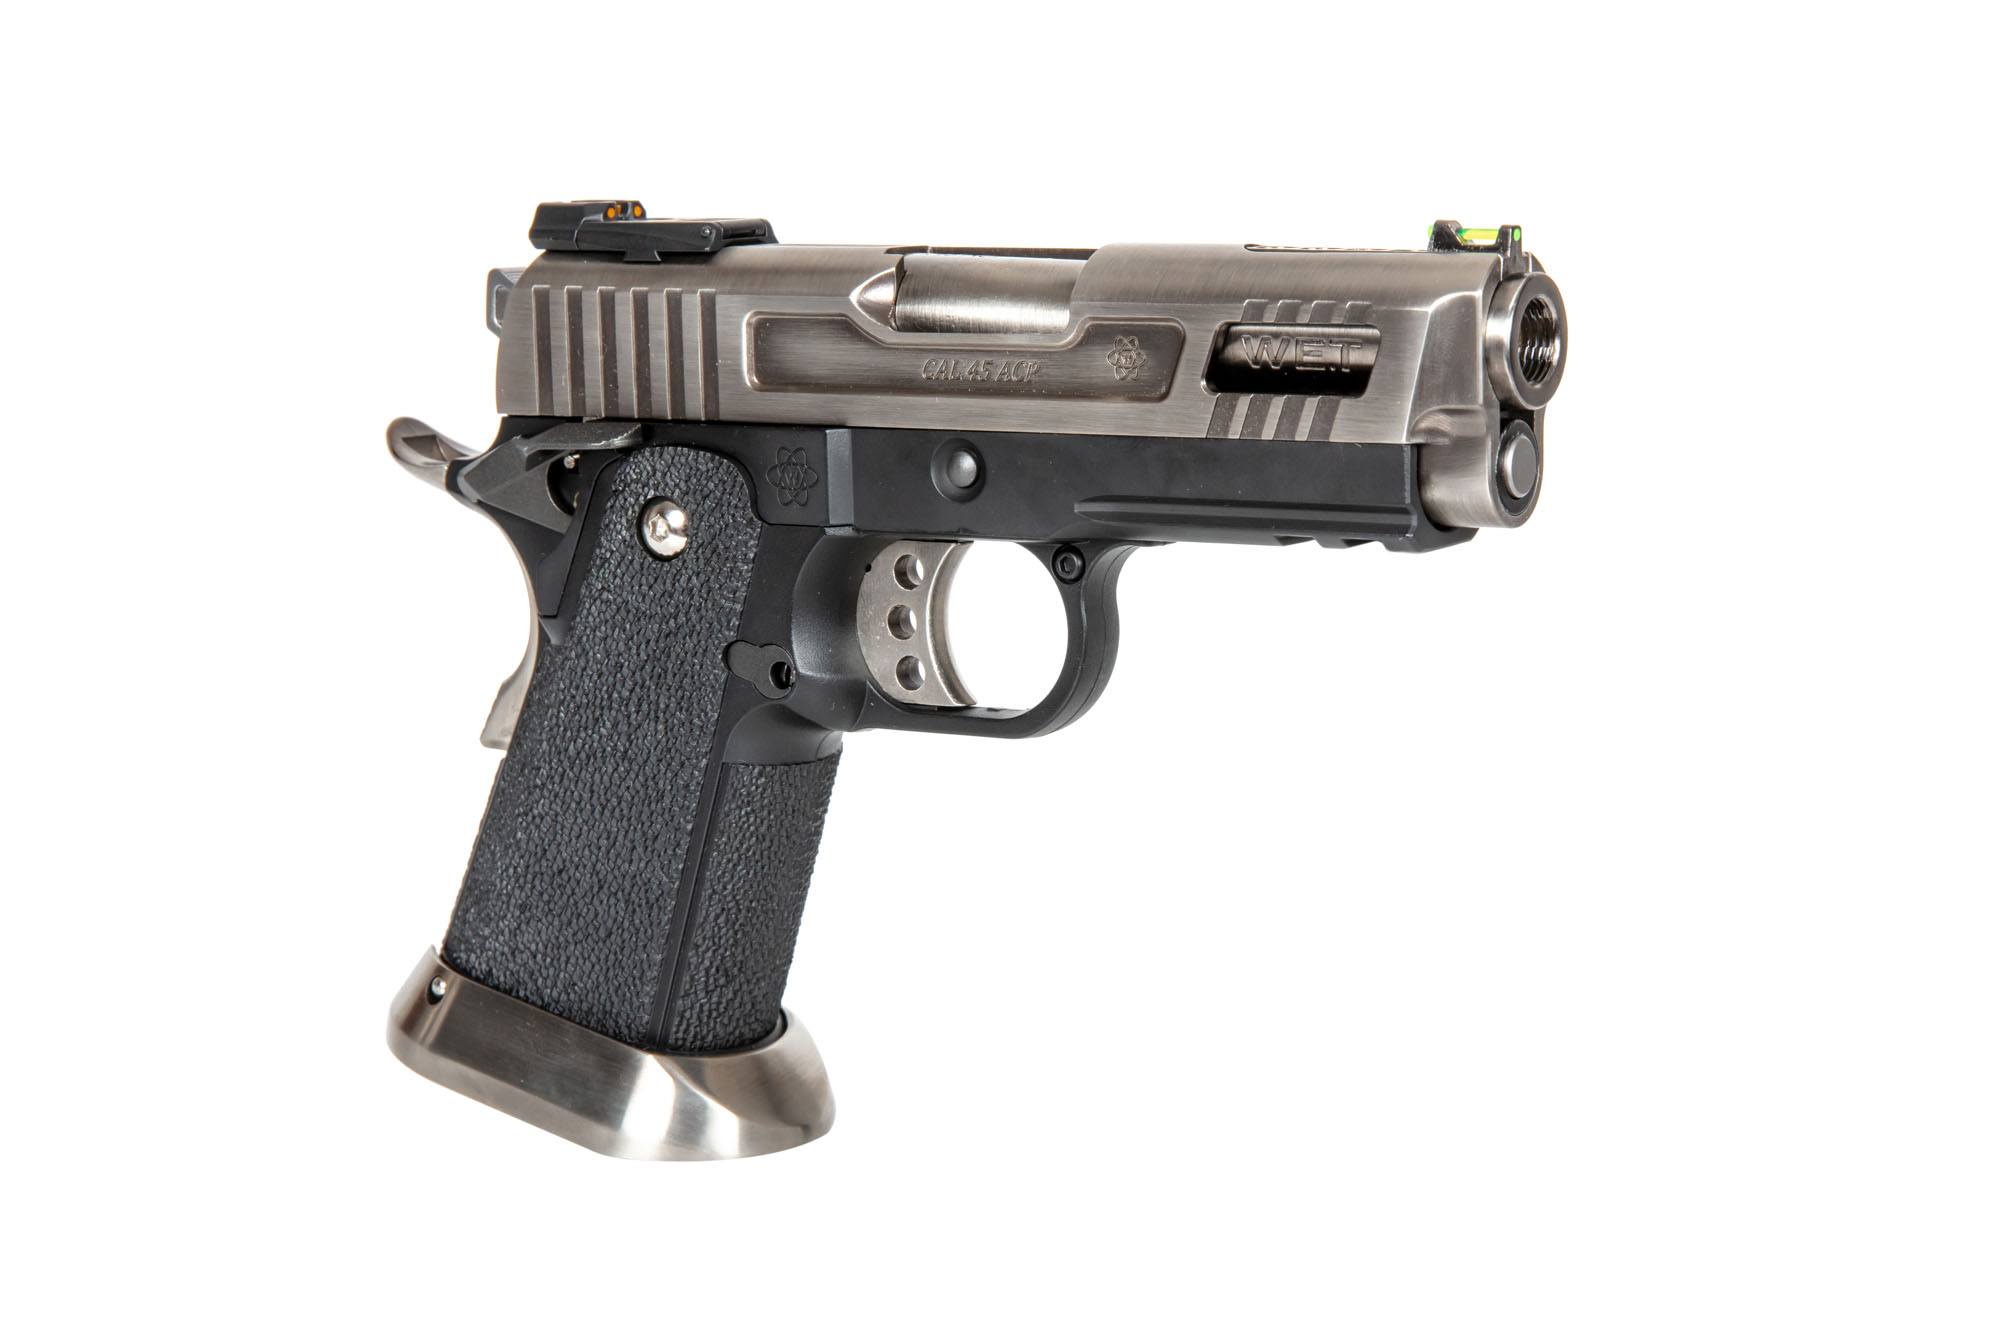 Hi-Capa 3.8 Force “Velociraptor” (Full Auto) Pistol Replica - Silver by WE on Airsoft Mania Europe